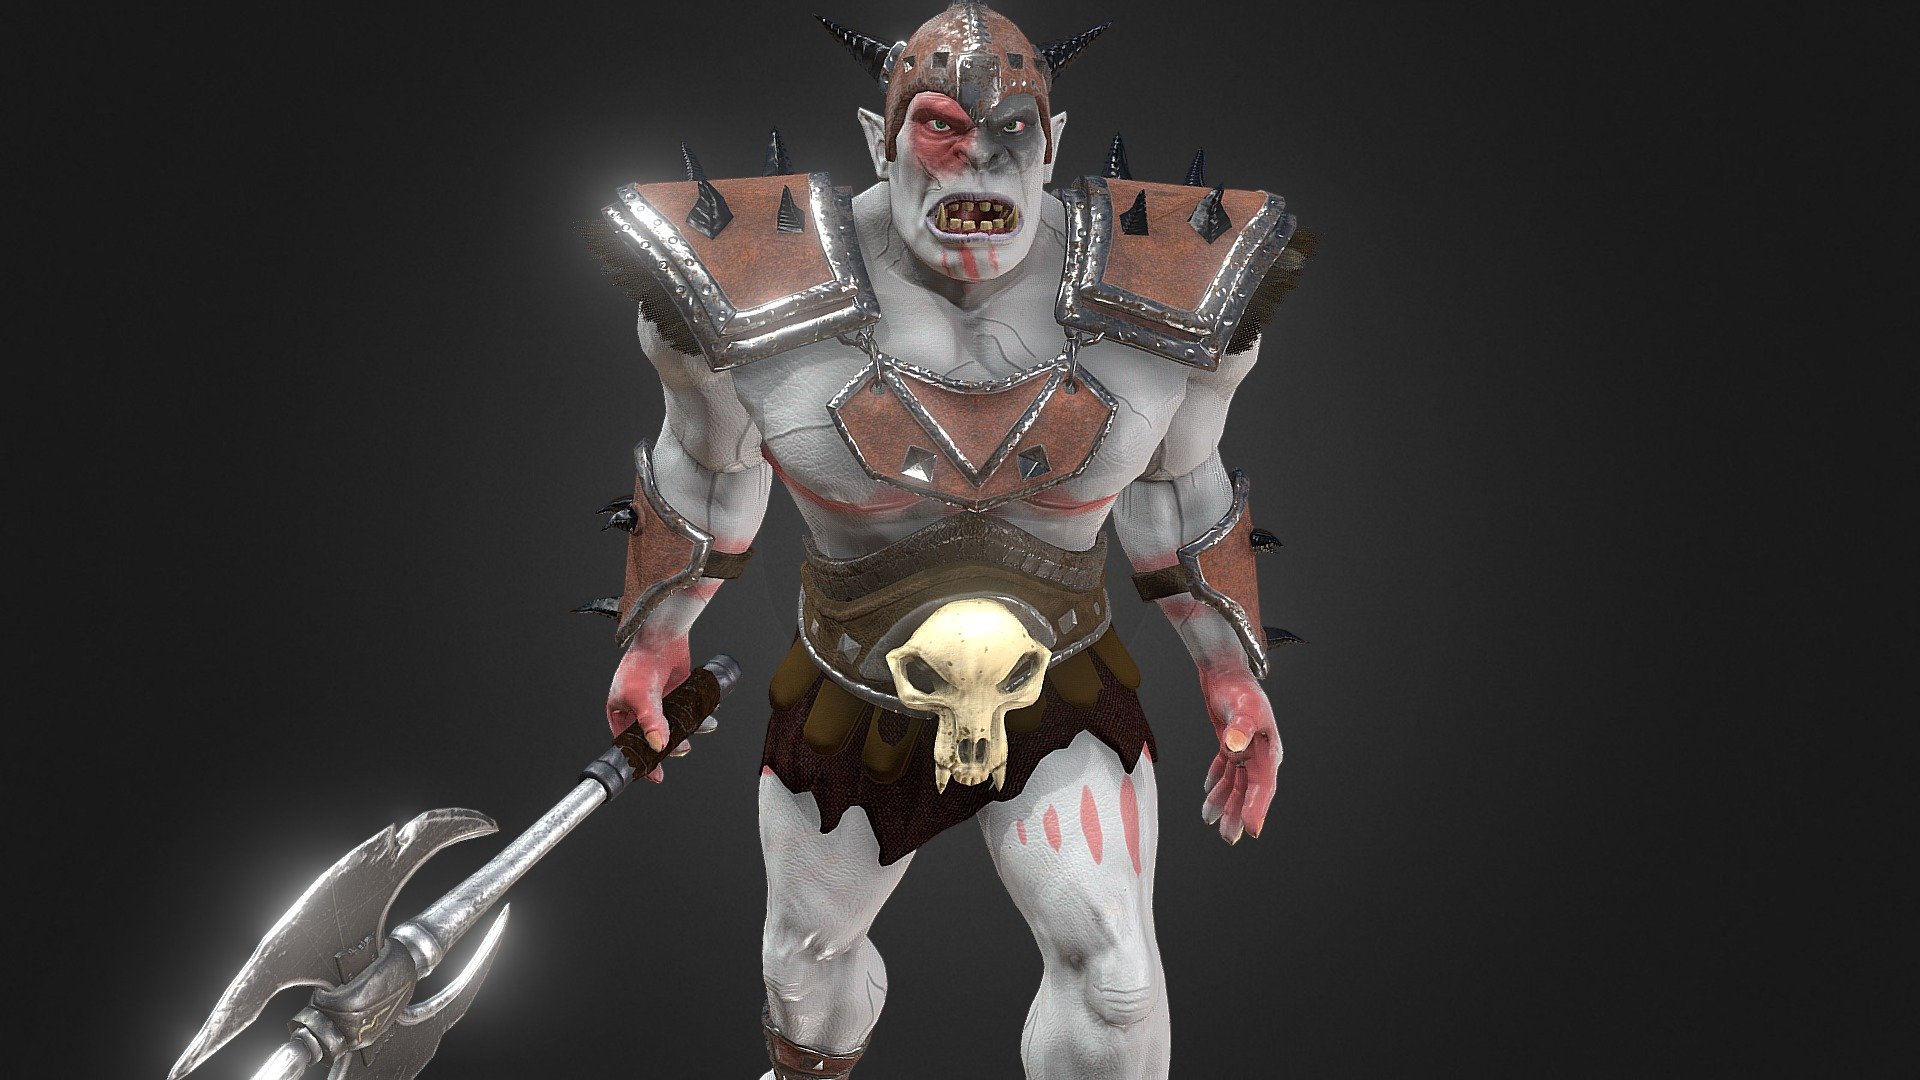 Orc 3D character. In 4 different color variations. Red, white, green and black. Model have 15 k polygons, 16 k vertices total. Textures are 4K PBR.

19 custom animations are included

You can preview them in youtube video. https://youtu.be/C1bJRQXdOBI When video reach moment where orc is in the forest, those animations are various free mecanim animations from unity asset store. I used them to showcase compatibility of this model with even the most extreme movements of various mecanim animations. Before and after the forest animations are mine. In second video you can preview them all. https://youtu.be/koo6RpuqWek  Those are included in the pack

Examine model in 3D viewer

Included in pack:

-Maya files with rigged orc in T-pose with and without axe. Rig is standard maya IK, optimized for Unity mecanim usage. 
-Maya files with animations. 
-FBX files of orc in T-pose with and without axe. FBX files of animations. Each animation is separate FBX file. 
-Textures - Orc game character - Buy Royalty Free 3D model by TomVeg (@tomislavveg) 3d model